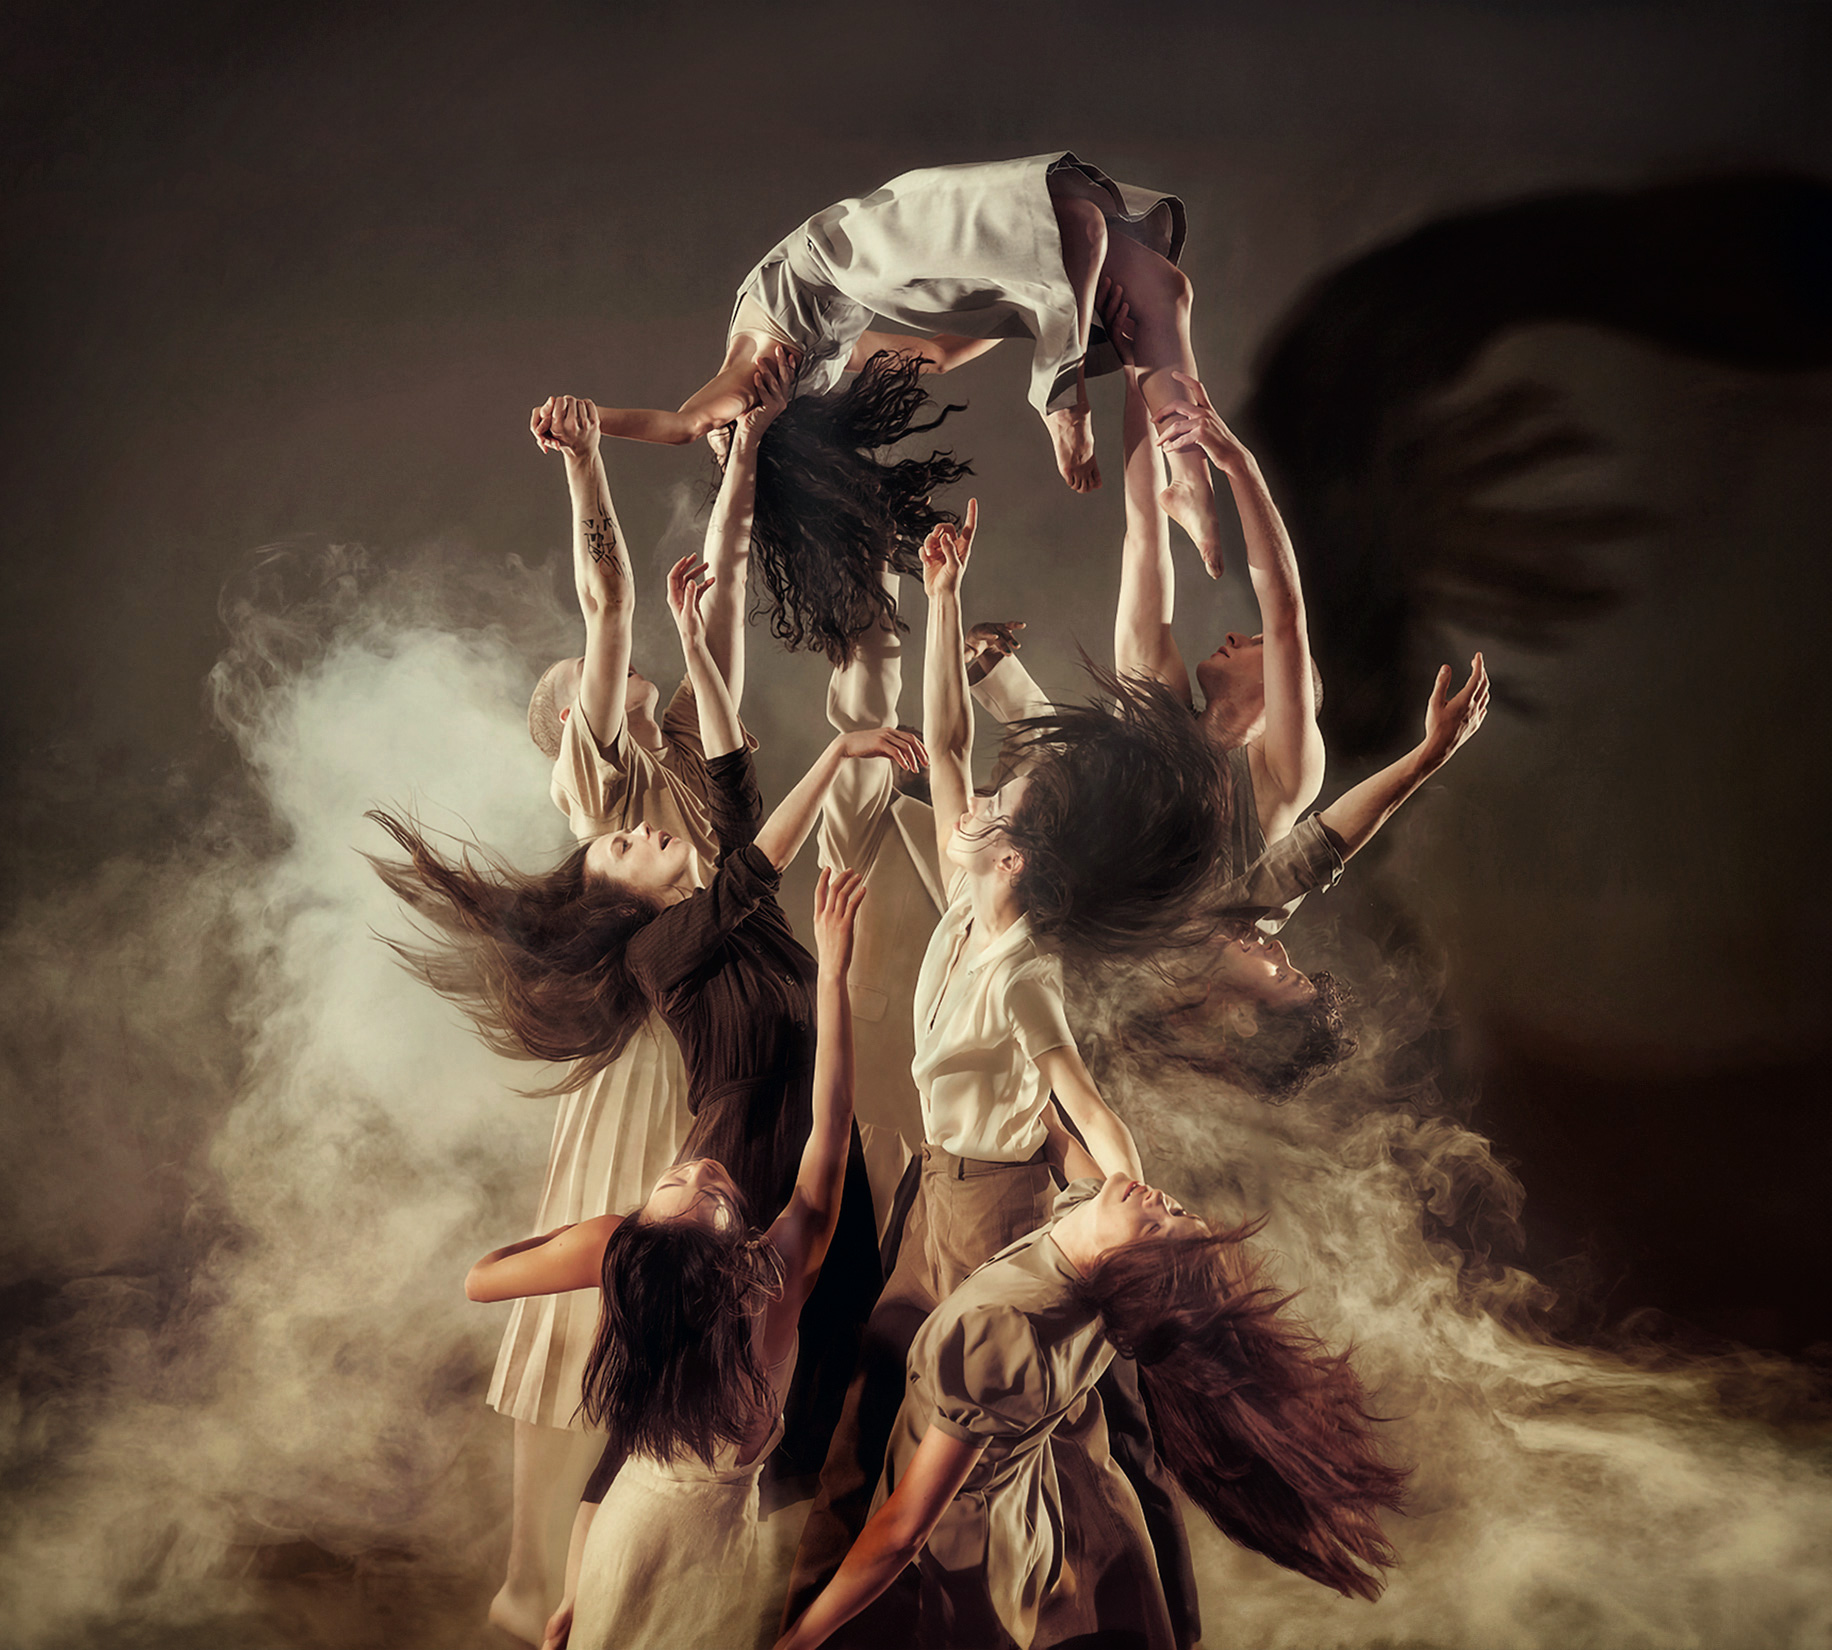 Dancers in a dramatic and artistic pose, surrounded by smoke. They are in various positions, some appear to be lifted or floating in the air. Their clothing is simple and in neutral colors, which contributes to the image's remote quality. The lighting is evocative and atmospheric, with shadows and highlights emphasizing the individuals' forms and the surrounding smoke. The overall mood in the picture is intense and emotional, conveying a sense of movement and energy.